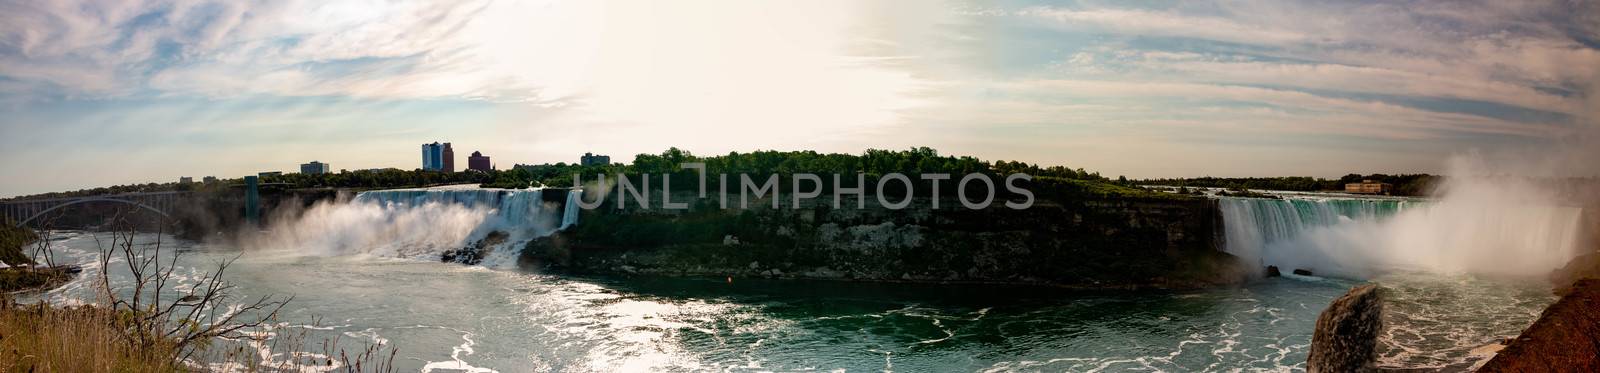 Niagara falls Canada: of an aerial panormal of the falls and the city of Niagara. Niagara is one of Canadas most popular tourist destinations and has been hit hard by covid. by mynewturtle1